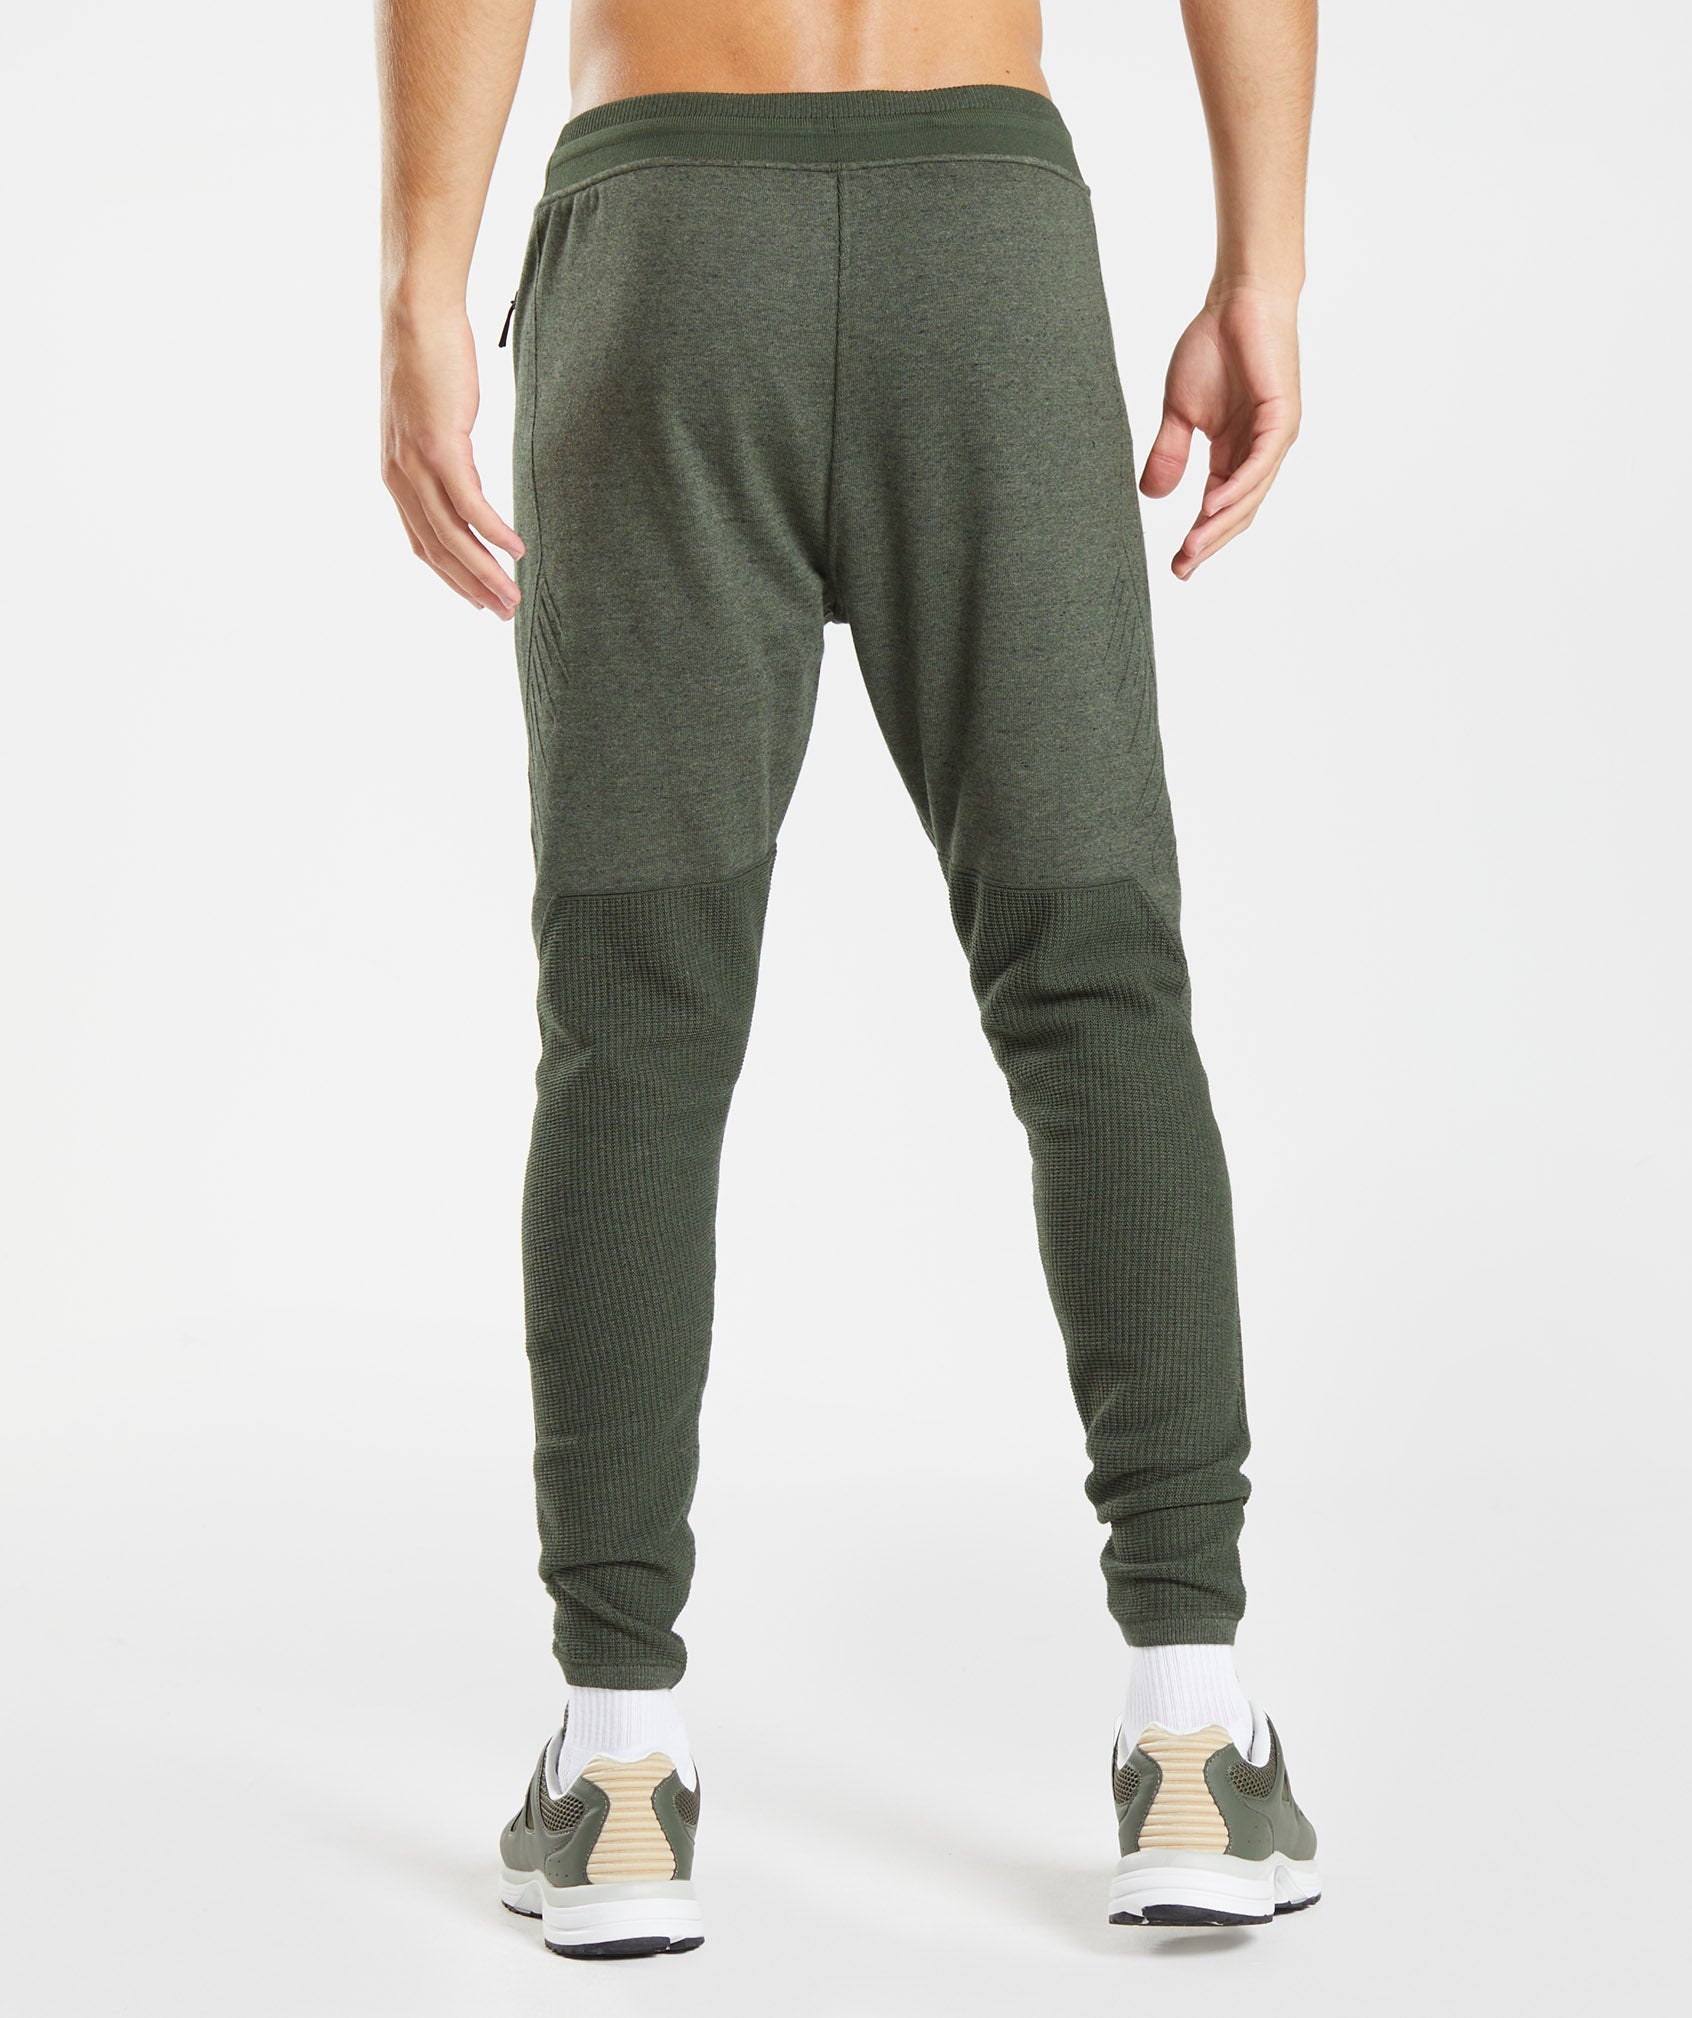 Gymshark Essential Oversized Joggers - Moss Olive